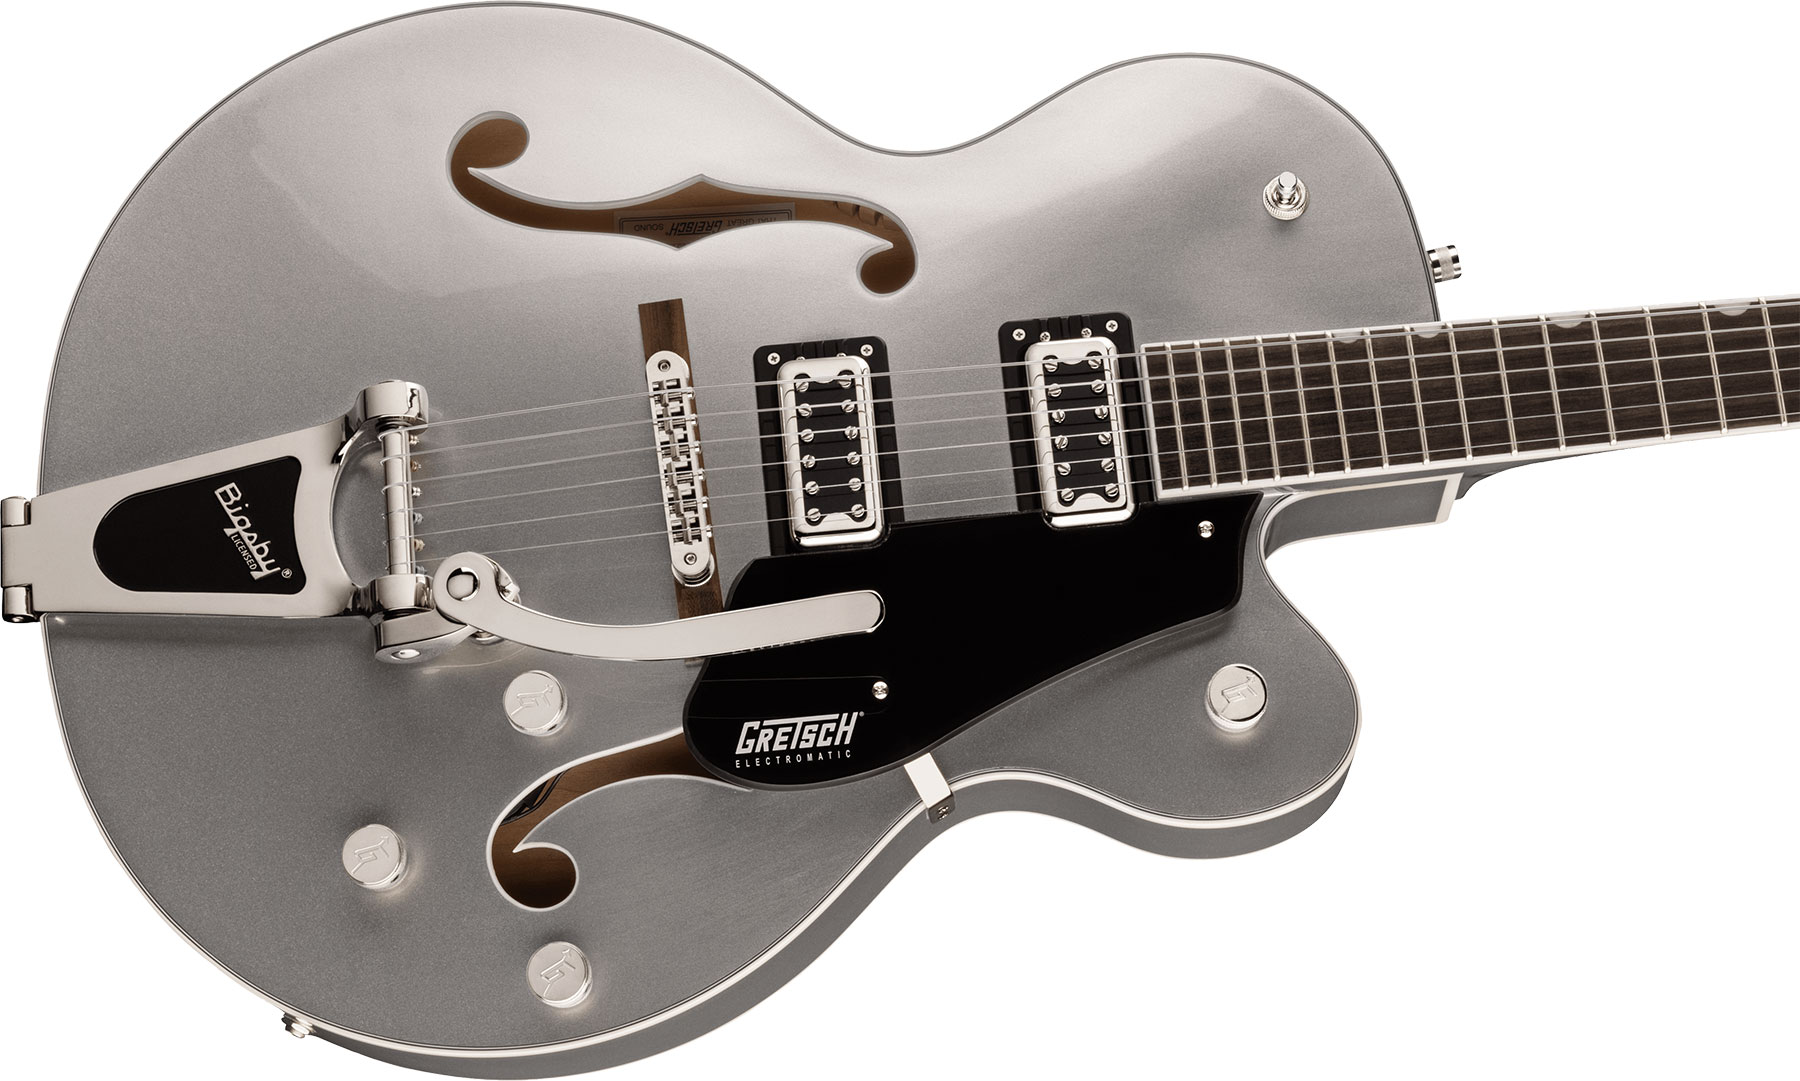 Gretsch G5420t Classic Electromatic Hollow Body Hh Trem Bigsby Lau - Airline Silver - Semi-Hollow E-Gitarre - Variation 2